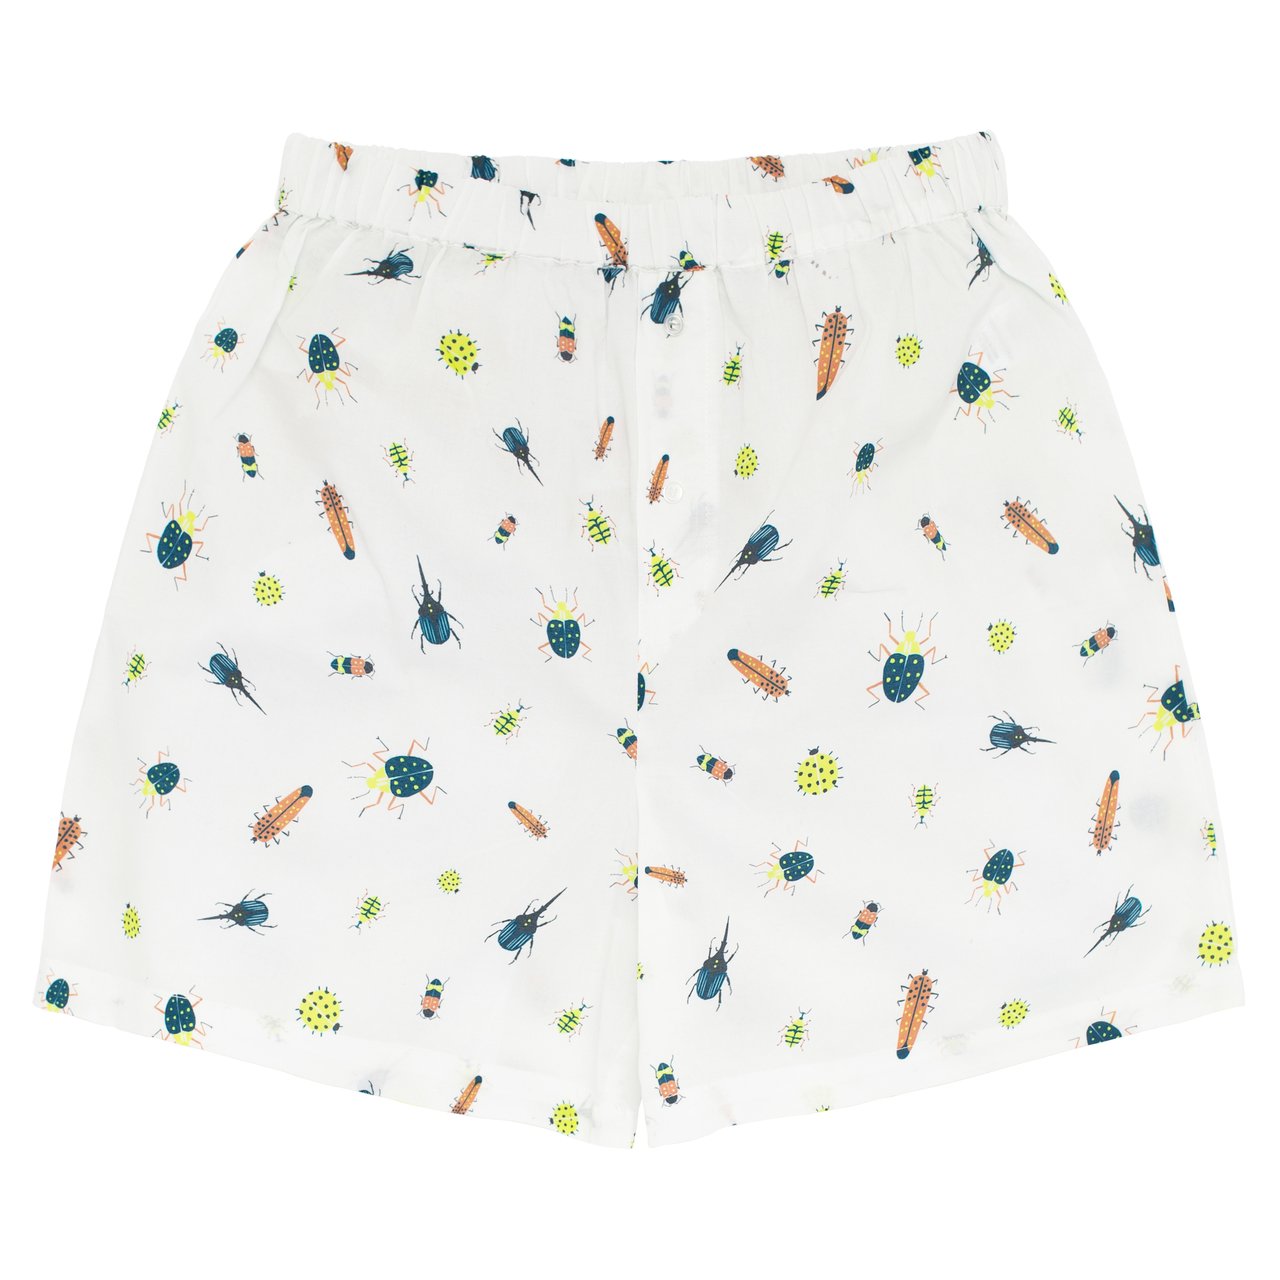 Boys 100% woven cotton boxers - Bed bugs